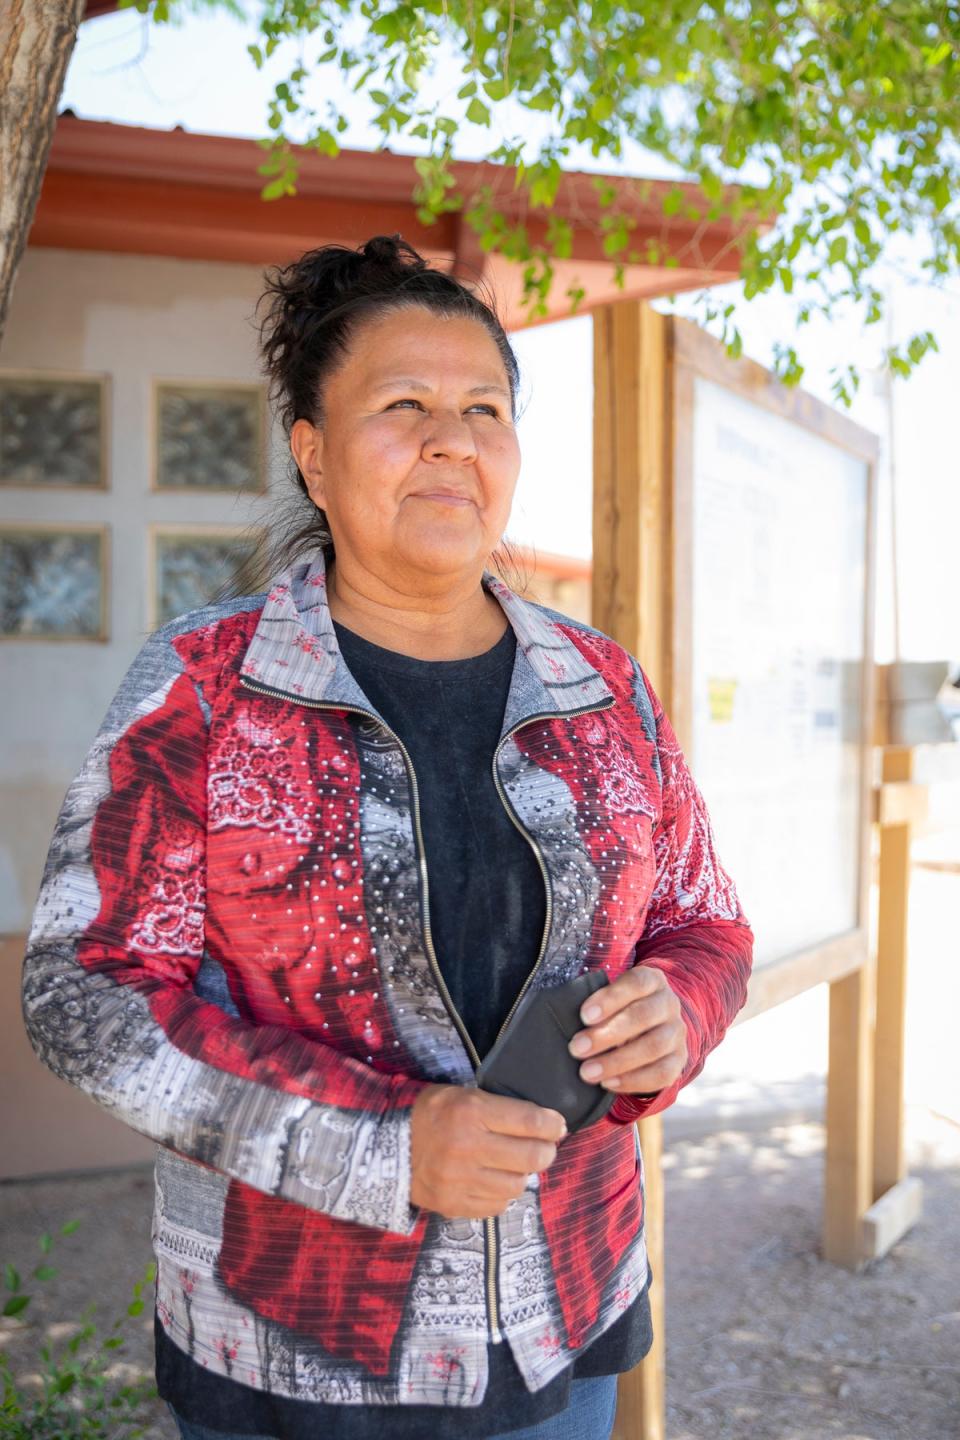 Cindy Howe, manager of the Navajo Water Project, outside the Baca/Prewitt Chapter house in Prewitt, New Mexico (Gabriella Marks for The Independent)